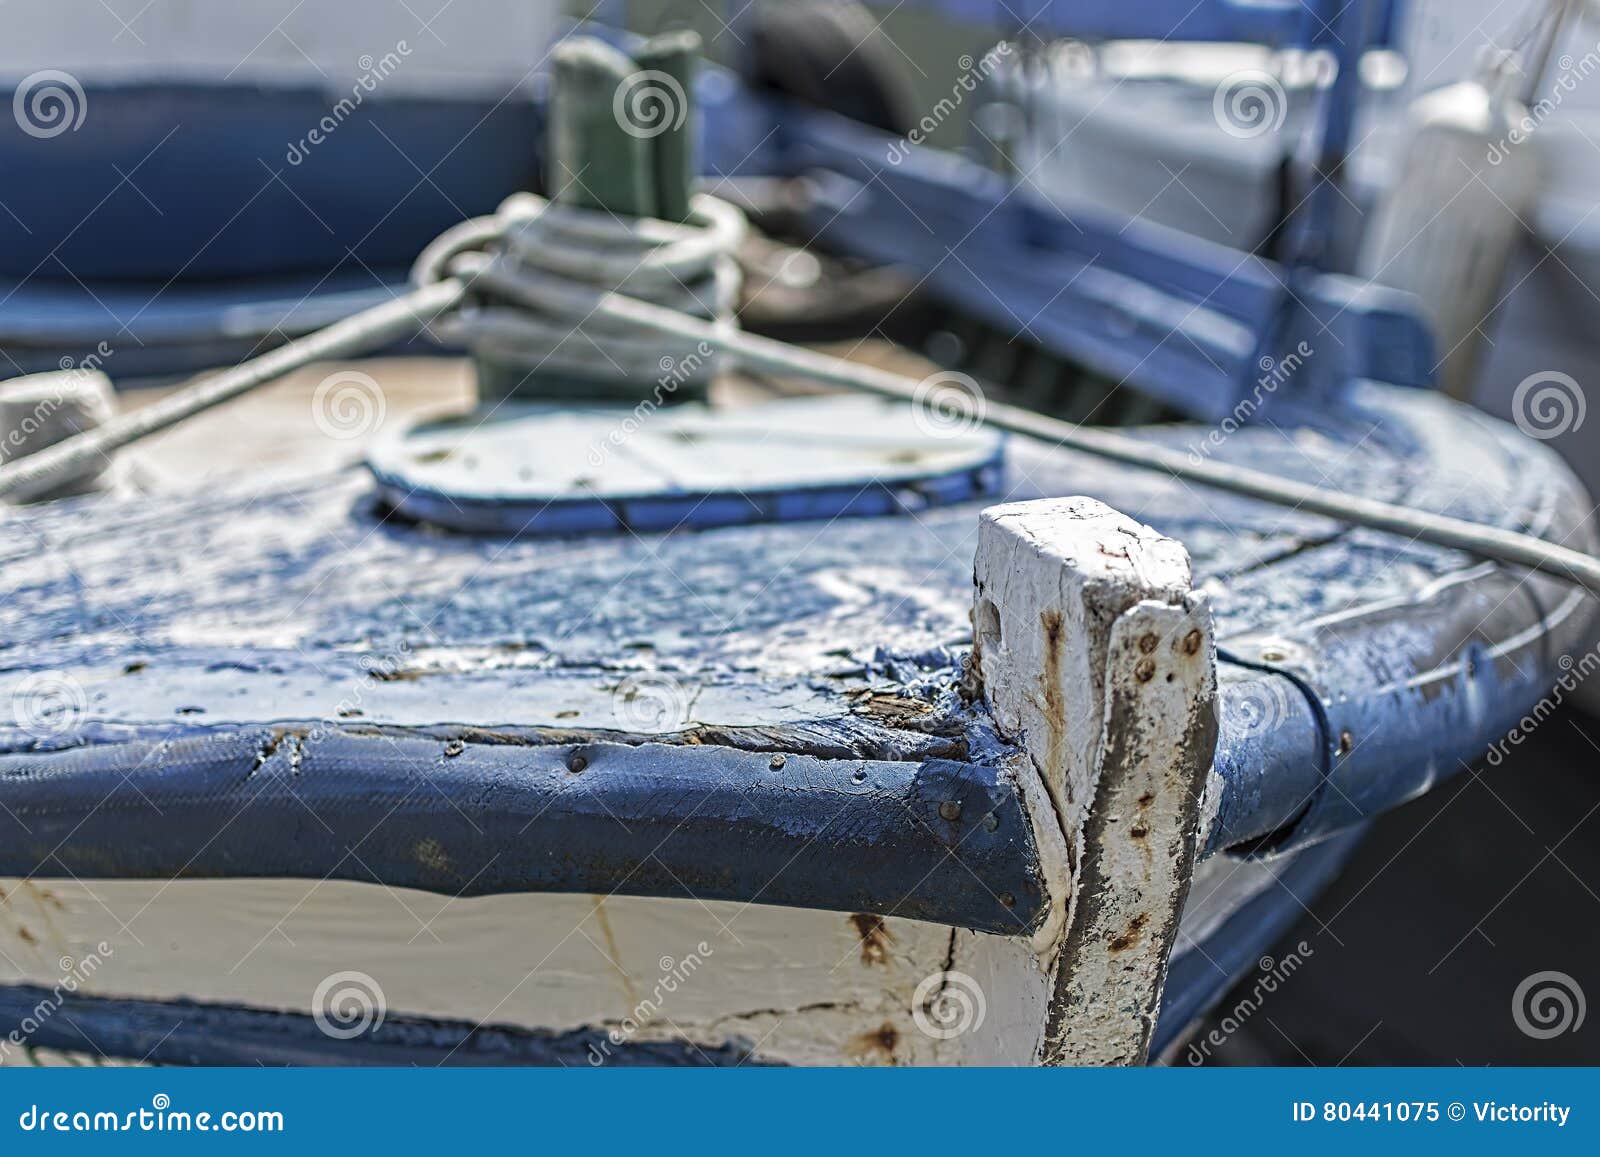 Ropes on Old Rusty Ship Closeup. Old Frayed Boat Rope as a